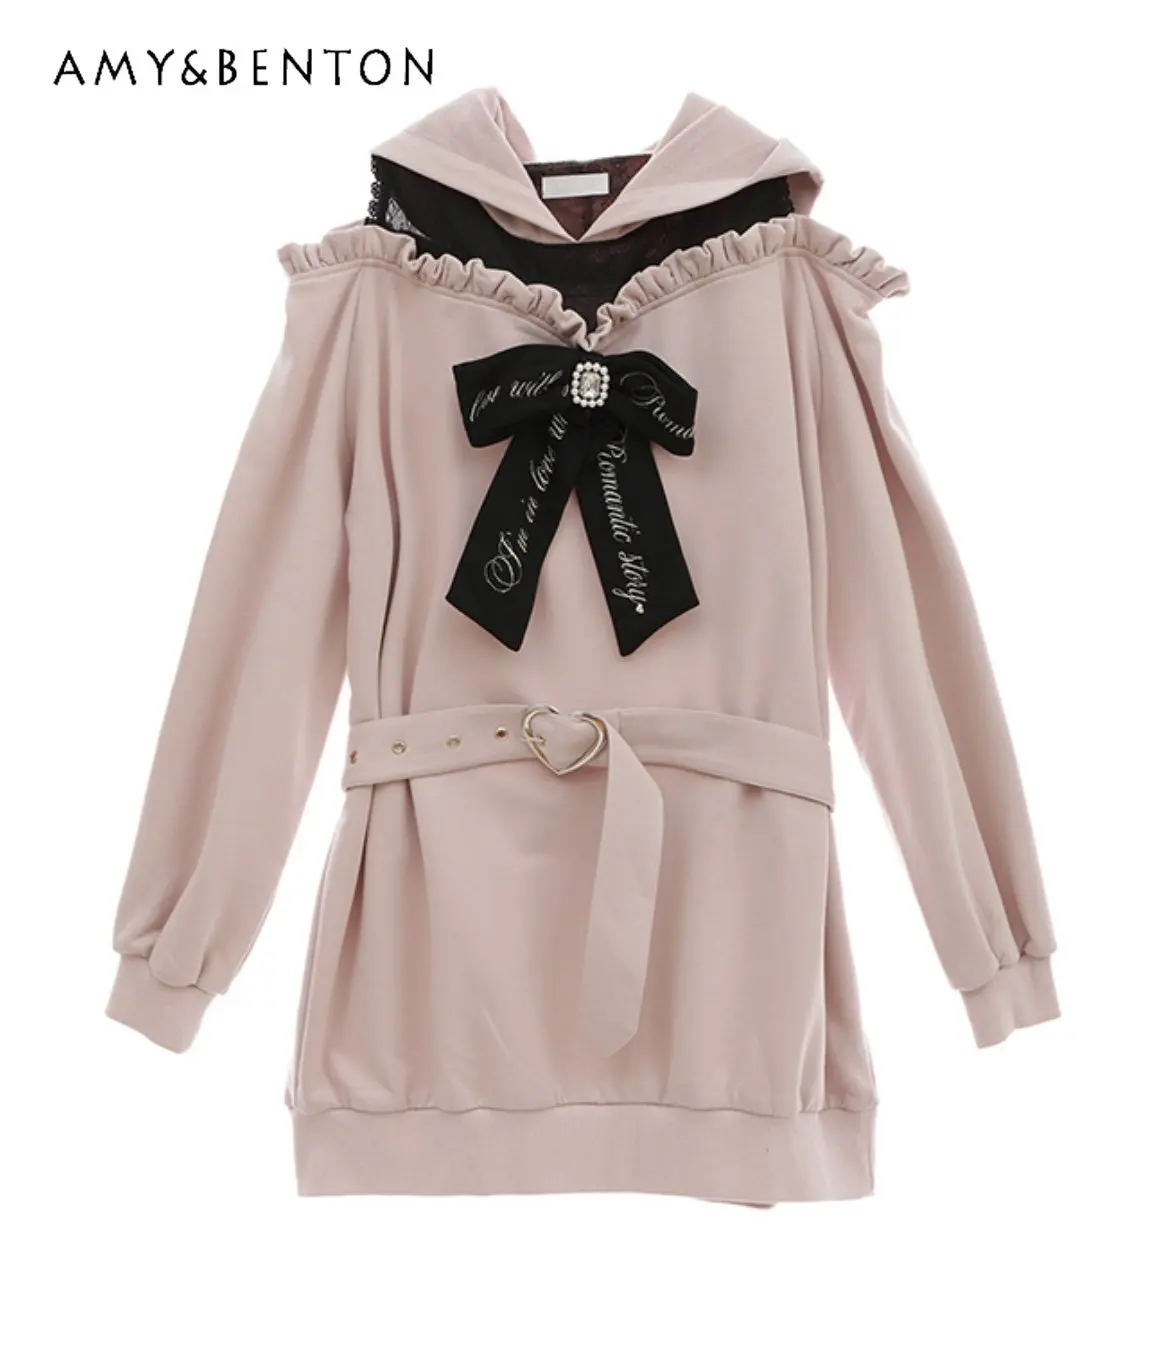 Oversize Loose Sweatshirt Dress for Women Autumn New Hooded Lace Patchwork Cold-Shoulder Long Sleeve Embroidered Bow Pullover